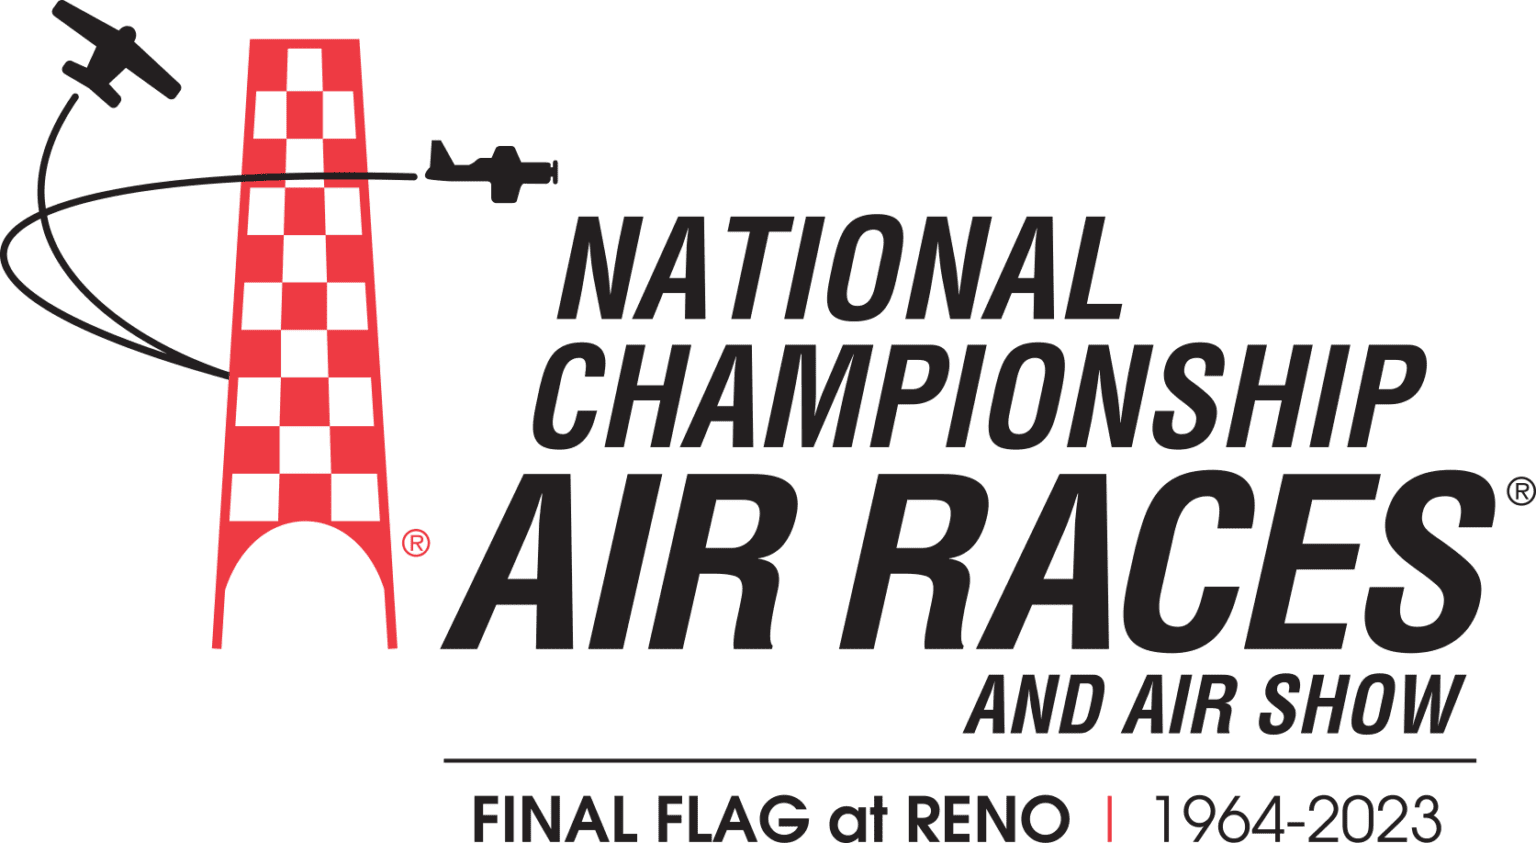 A poster of the national championship air races and airshow.